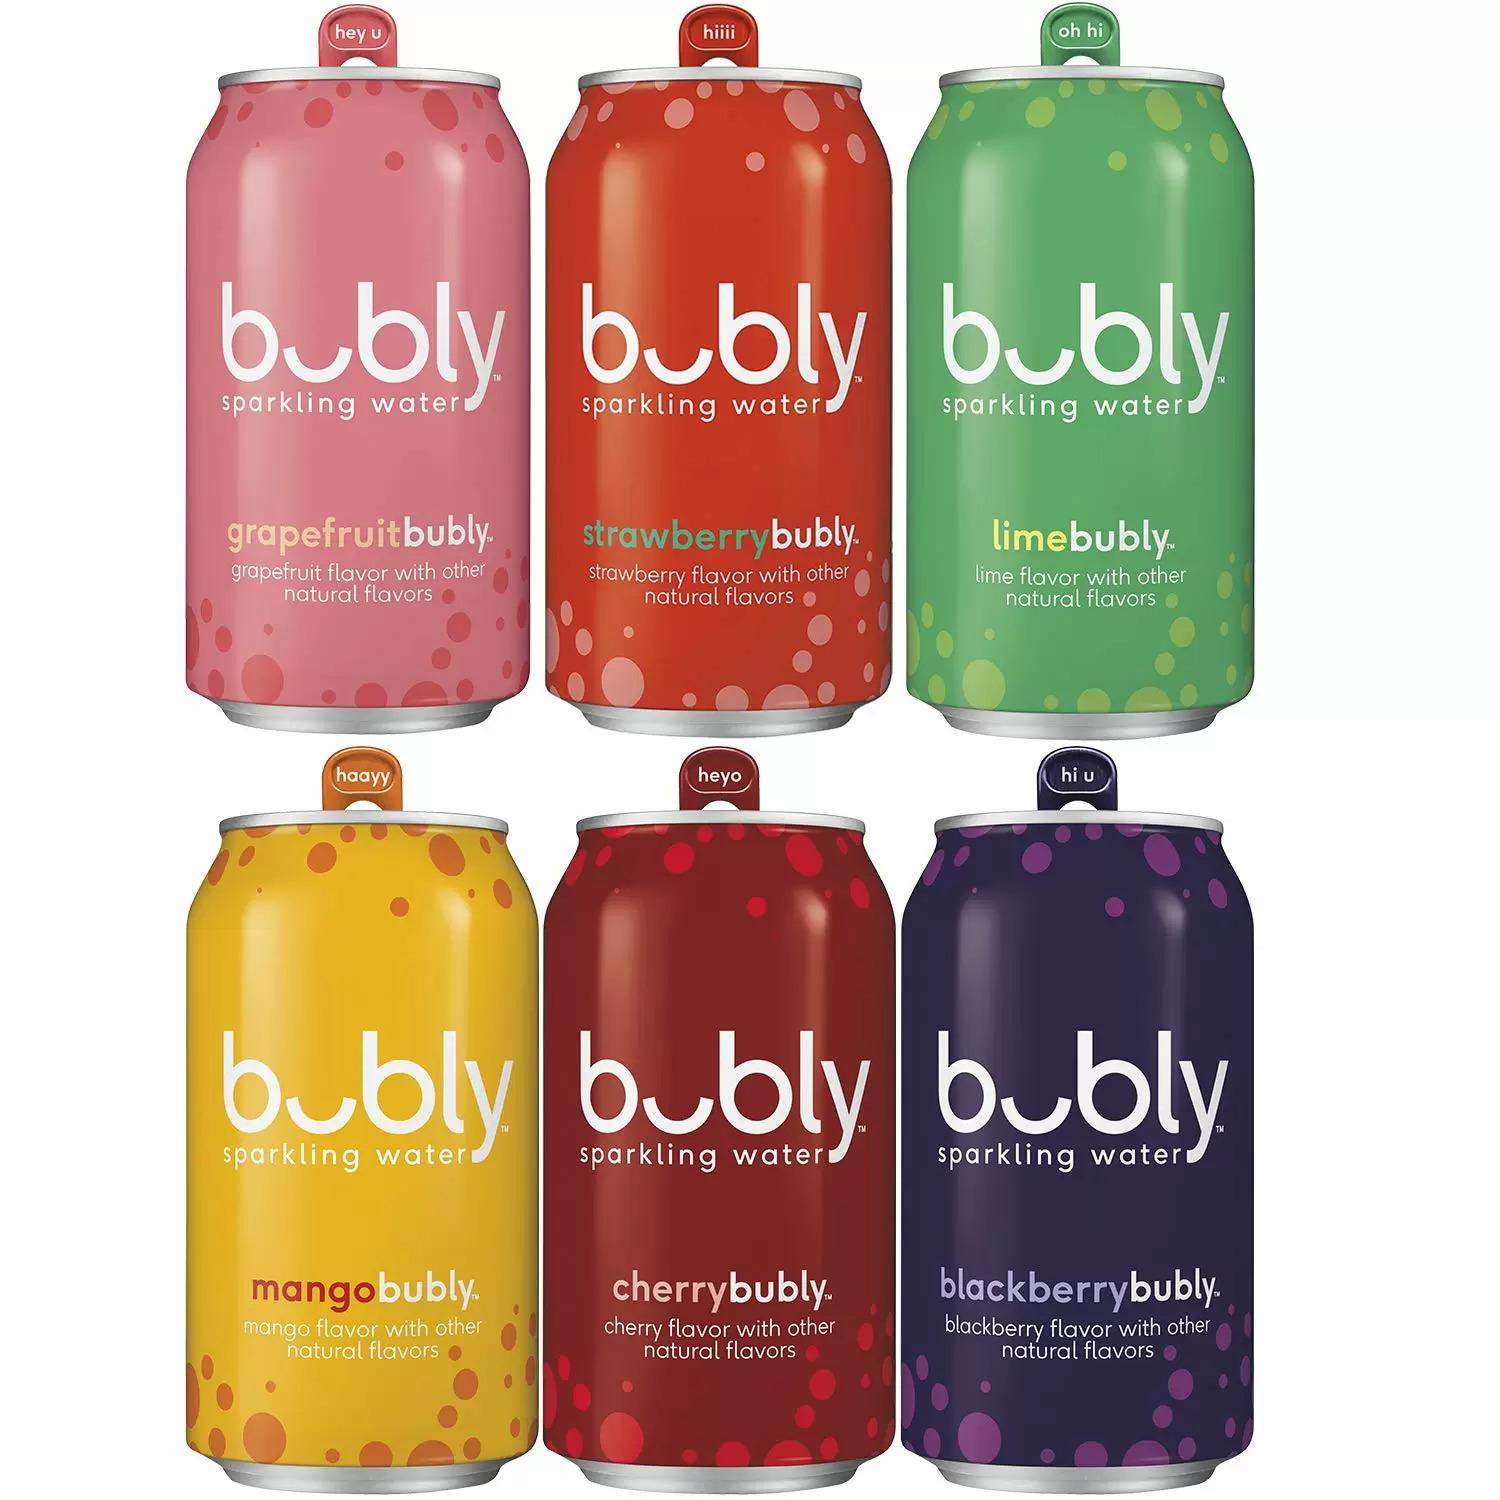 bubly Zero Calorie Sparkling Water 18 Pack for $6.75 Shipped